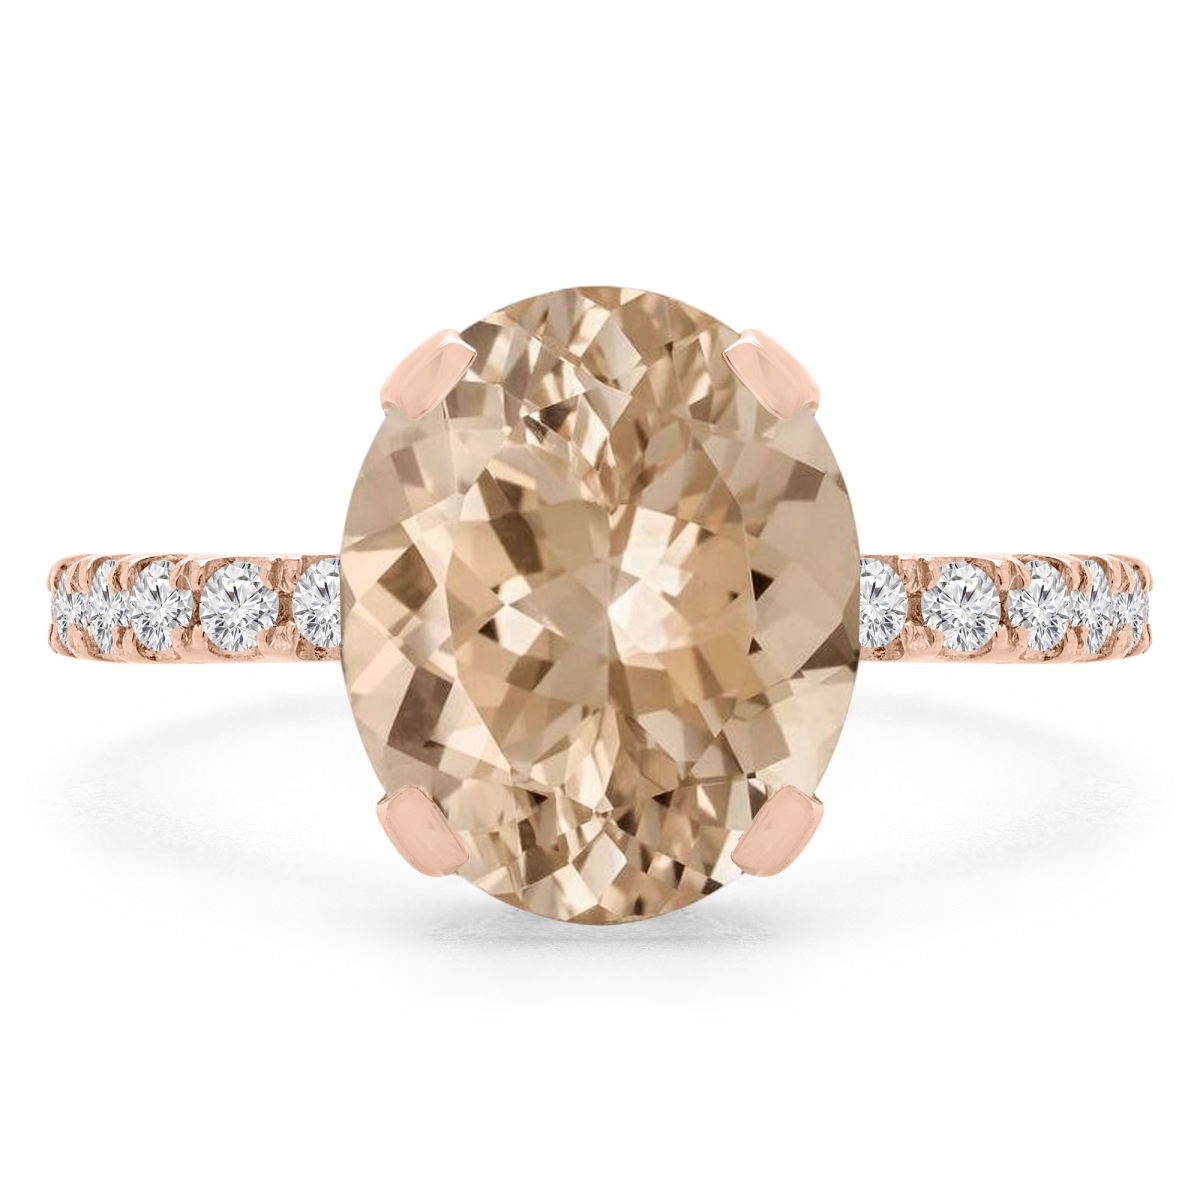 Picture of Majesty Diamonds MD190407-6.75 3.4 CTW Oval Pink Morganite Under Halo Engagement Ring in 14K Rose Gold - Size 6.75